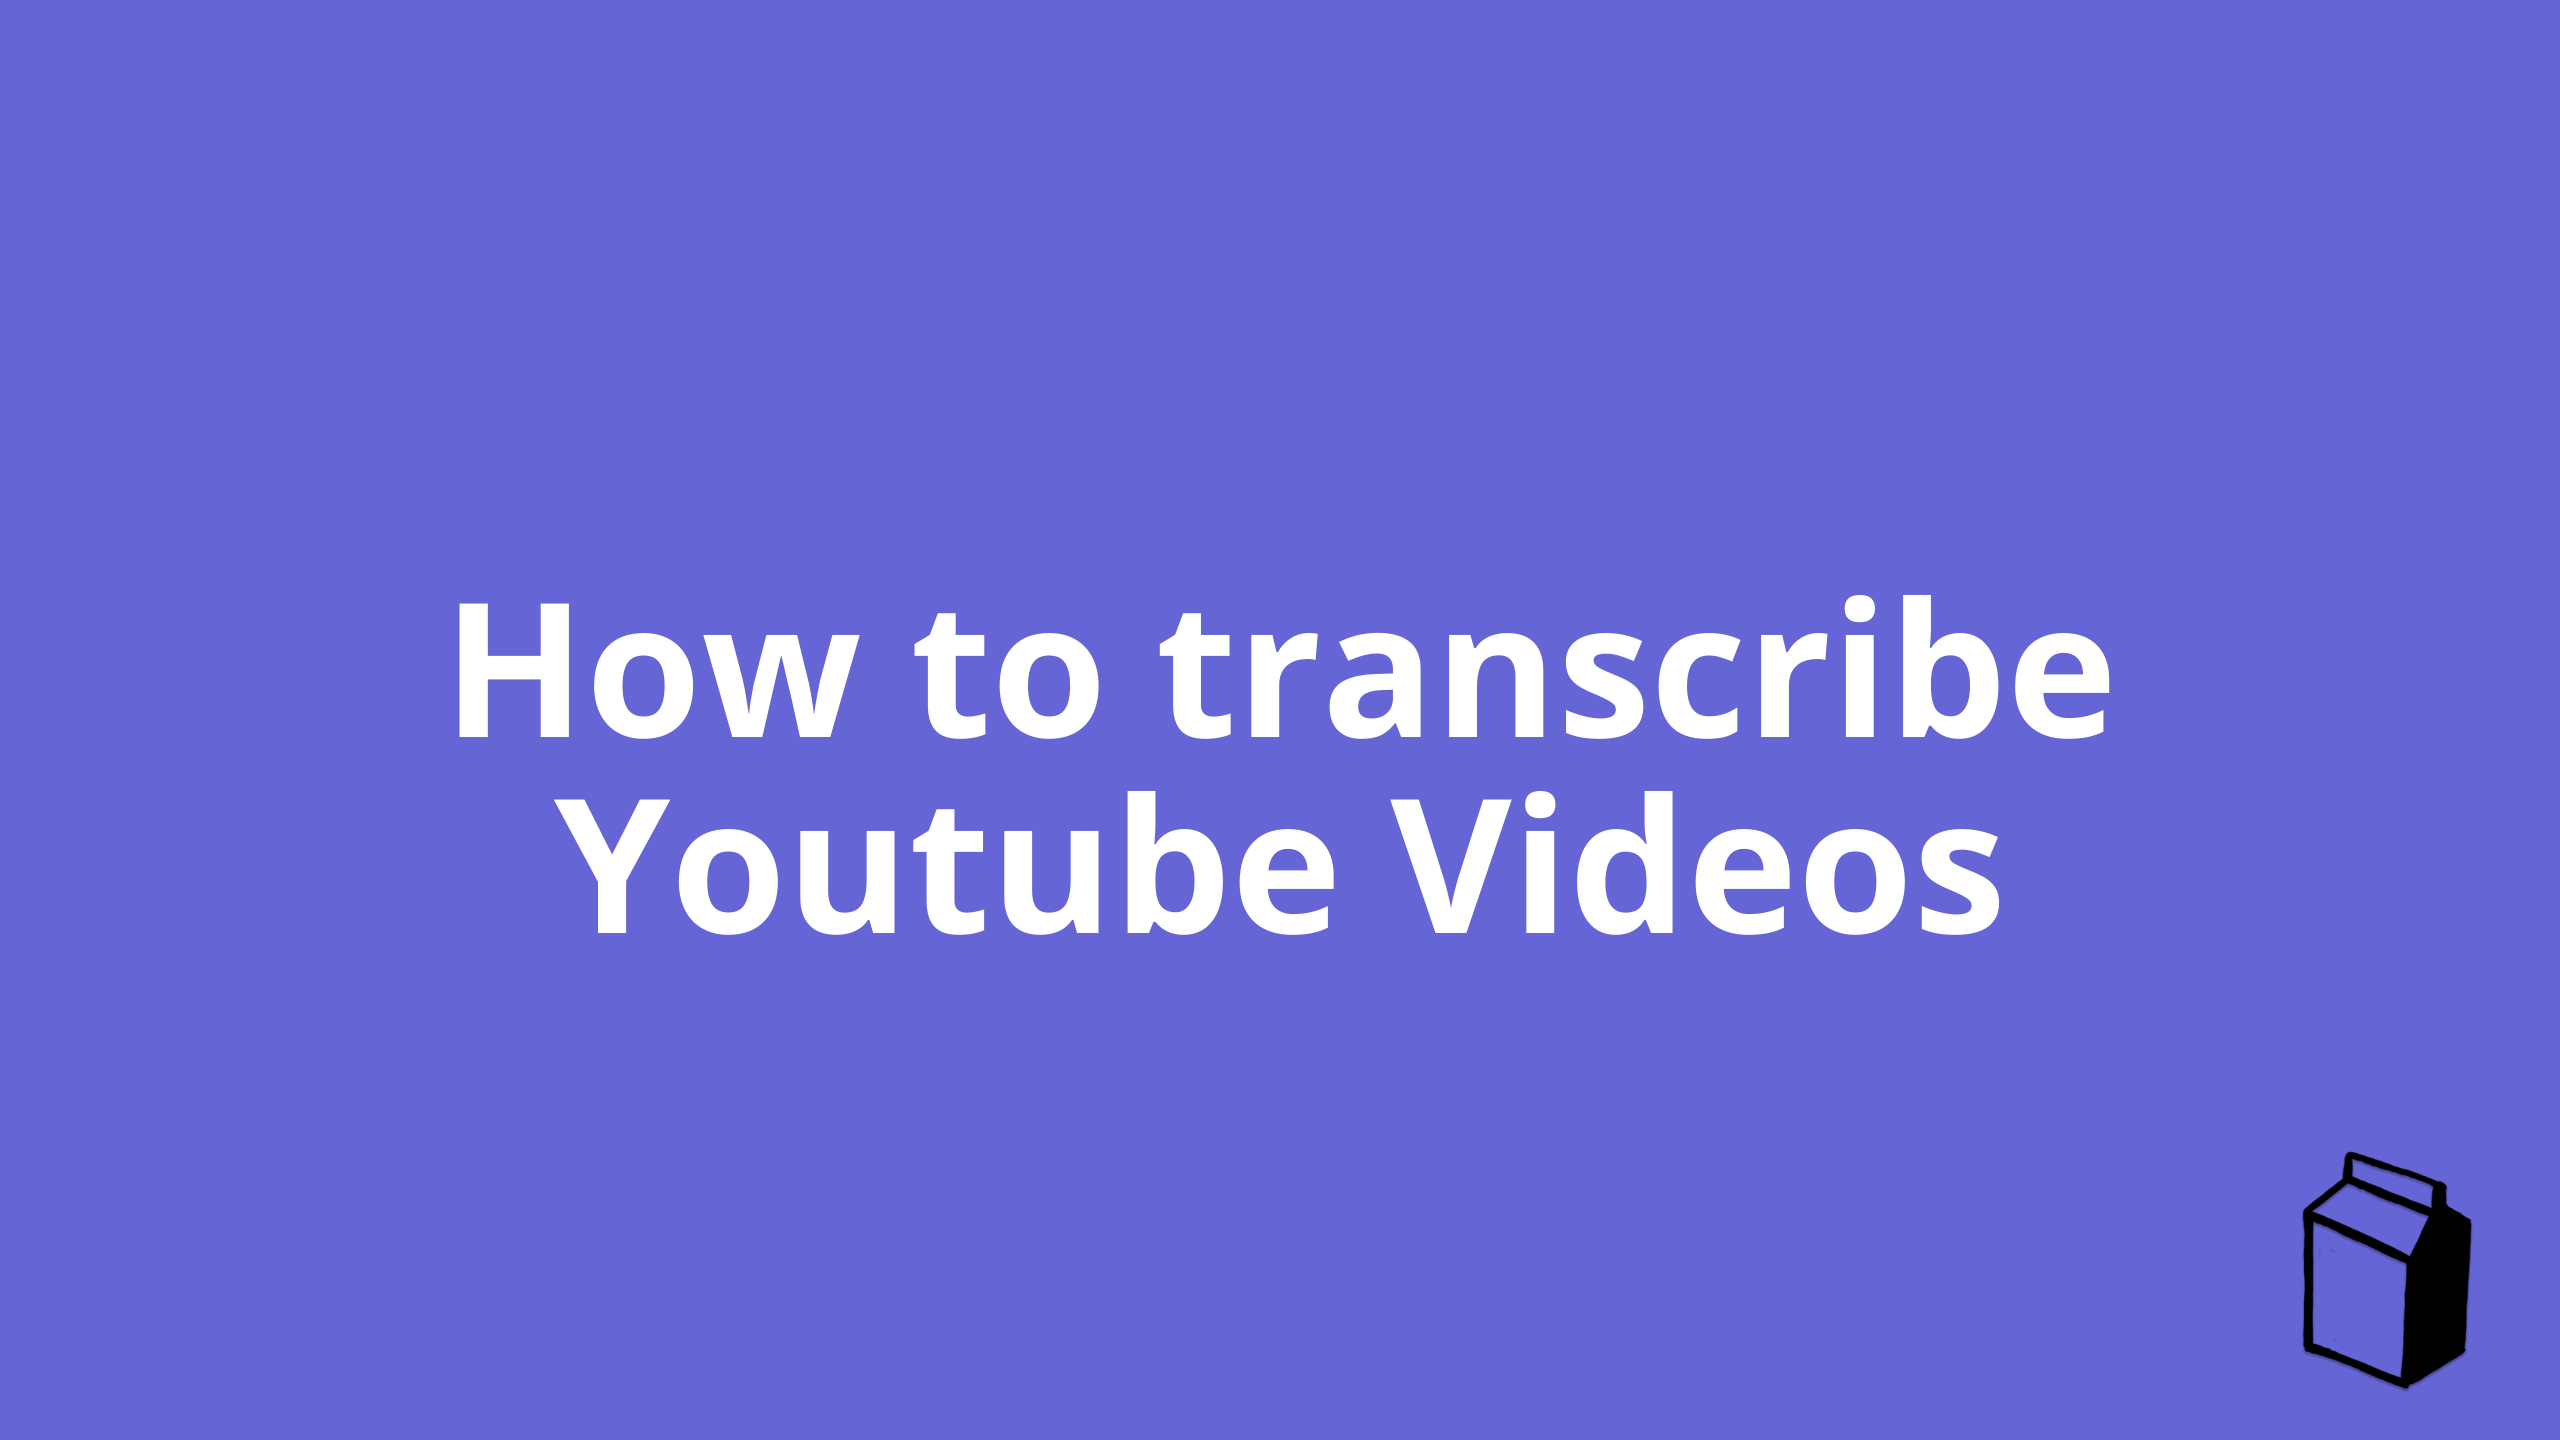 How to transcribe youtube video to text